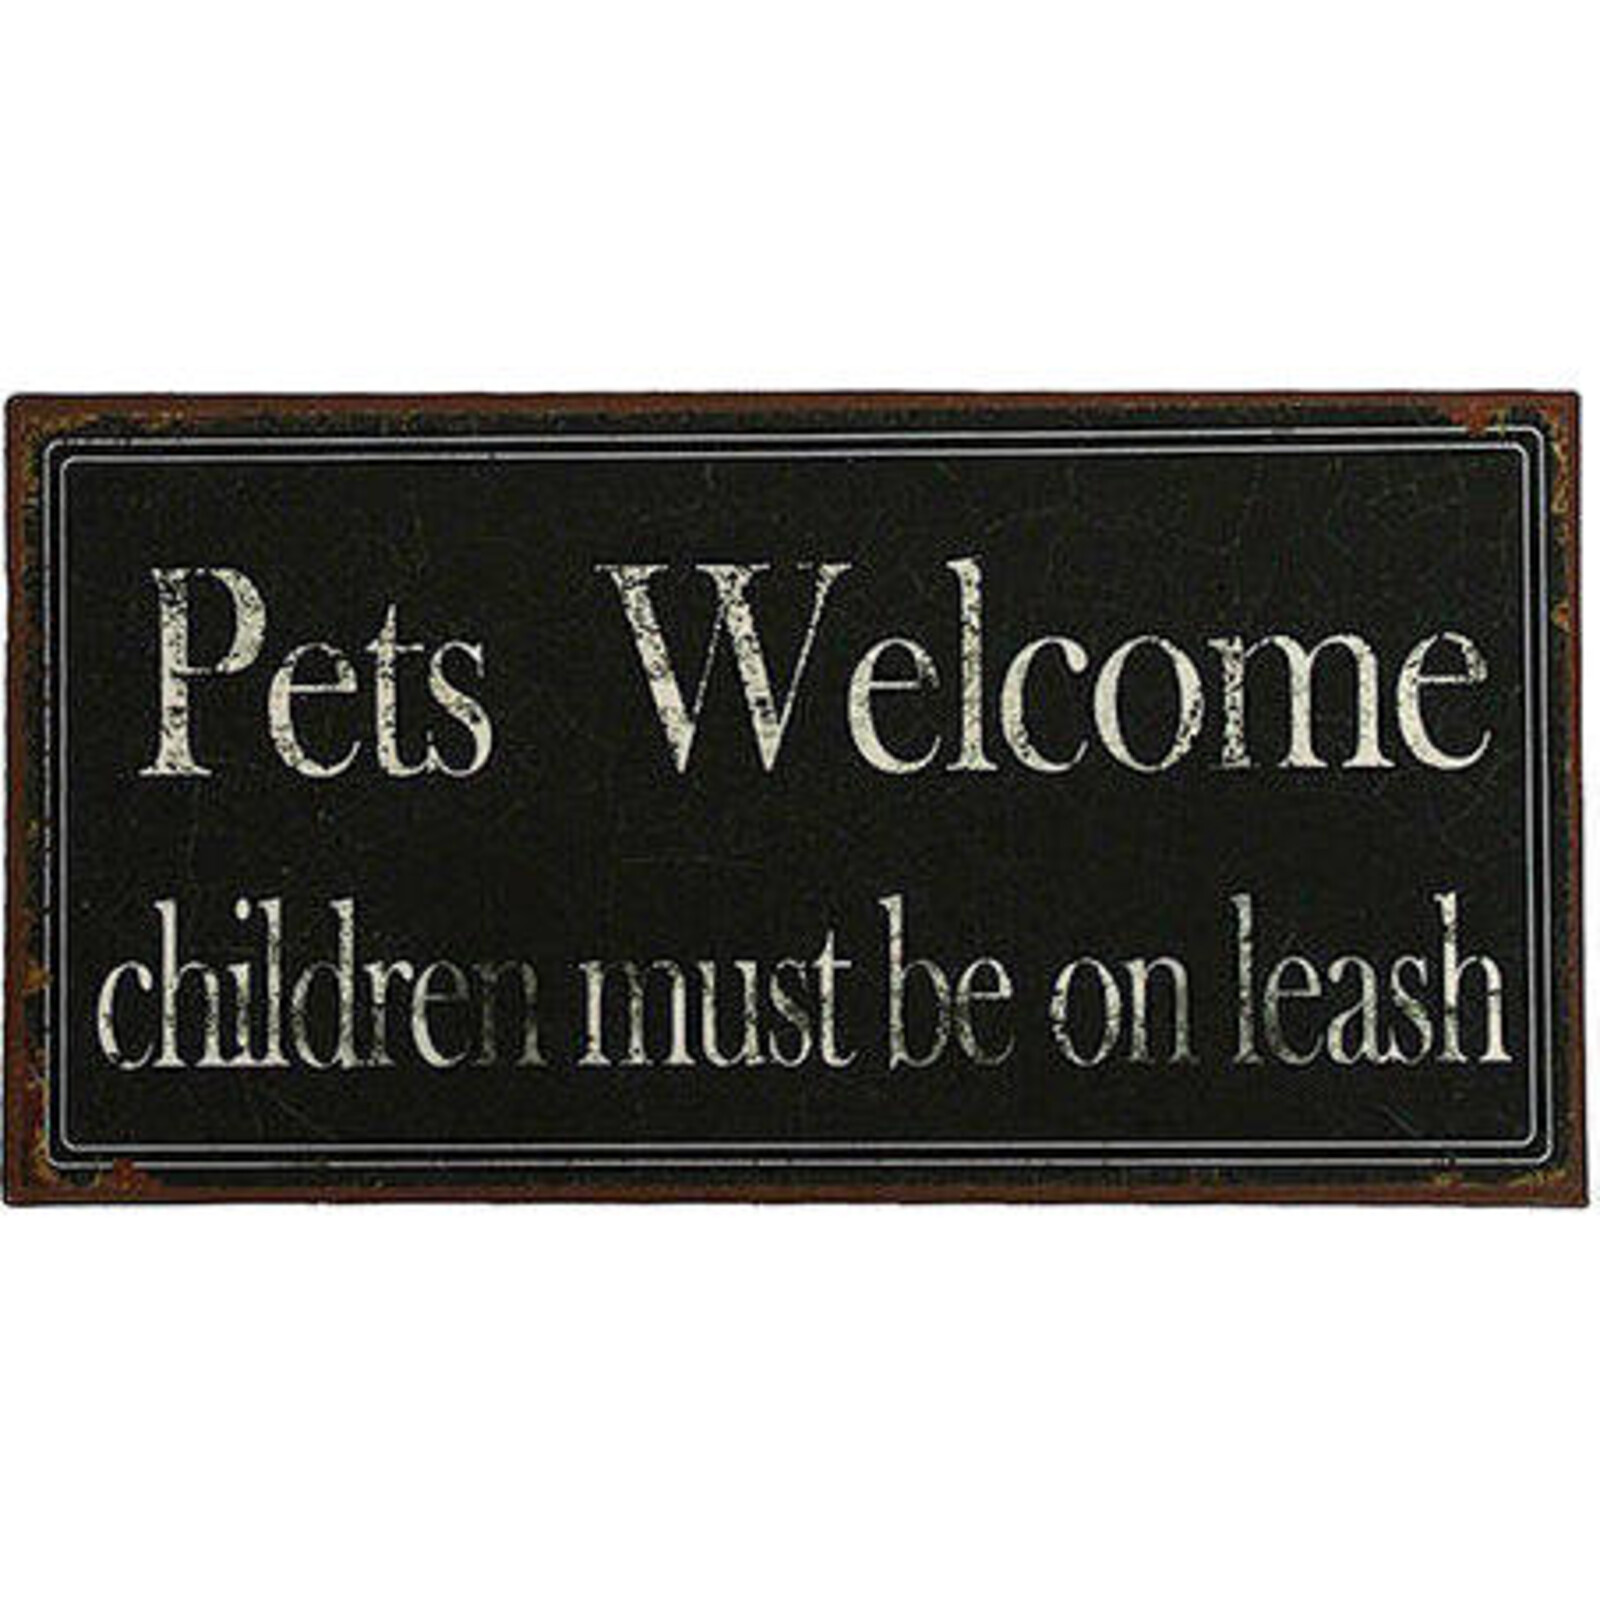 Tin Sign - Pets Welcome